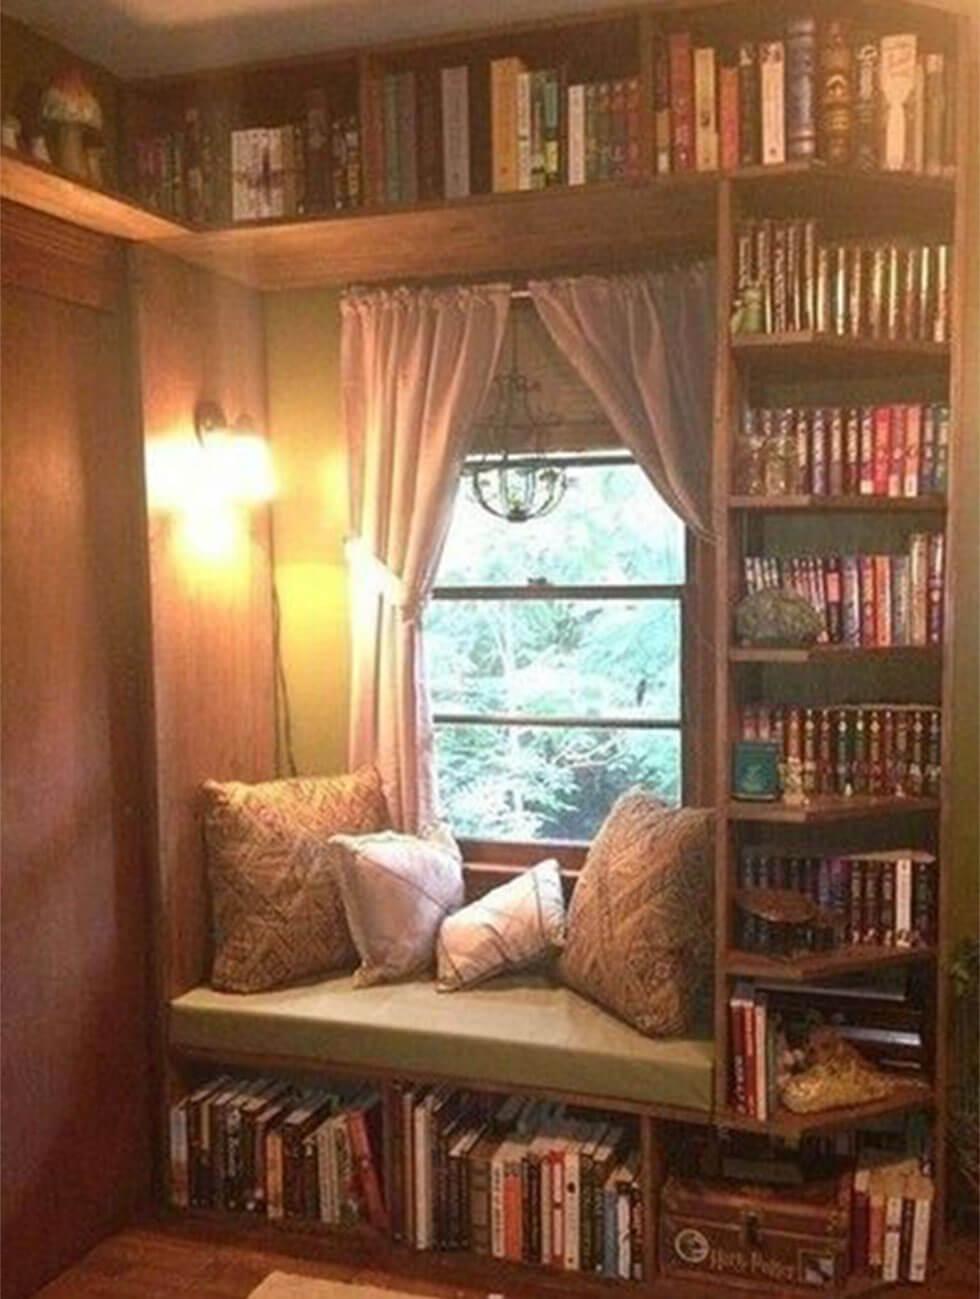 How To Create Your Own Reading Nook Inspiration Furniture And Choice